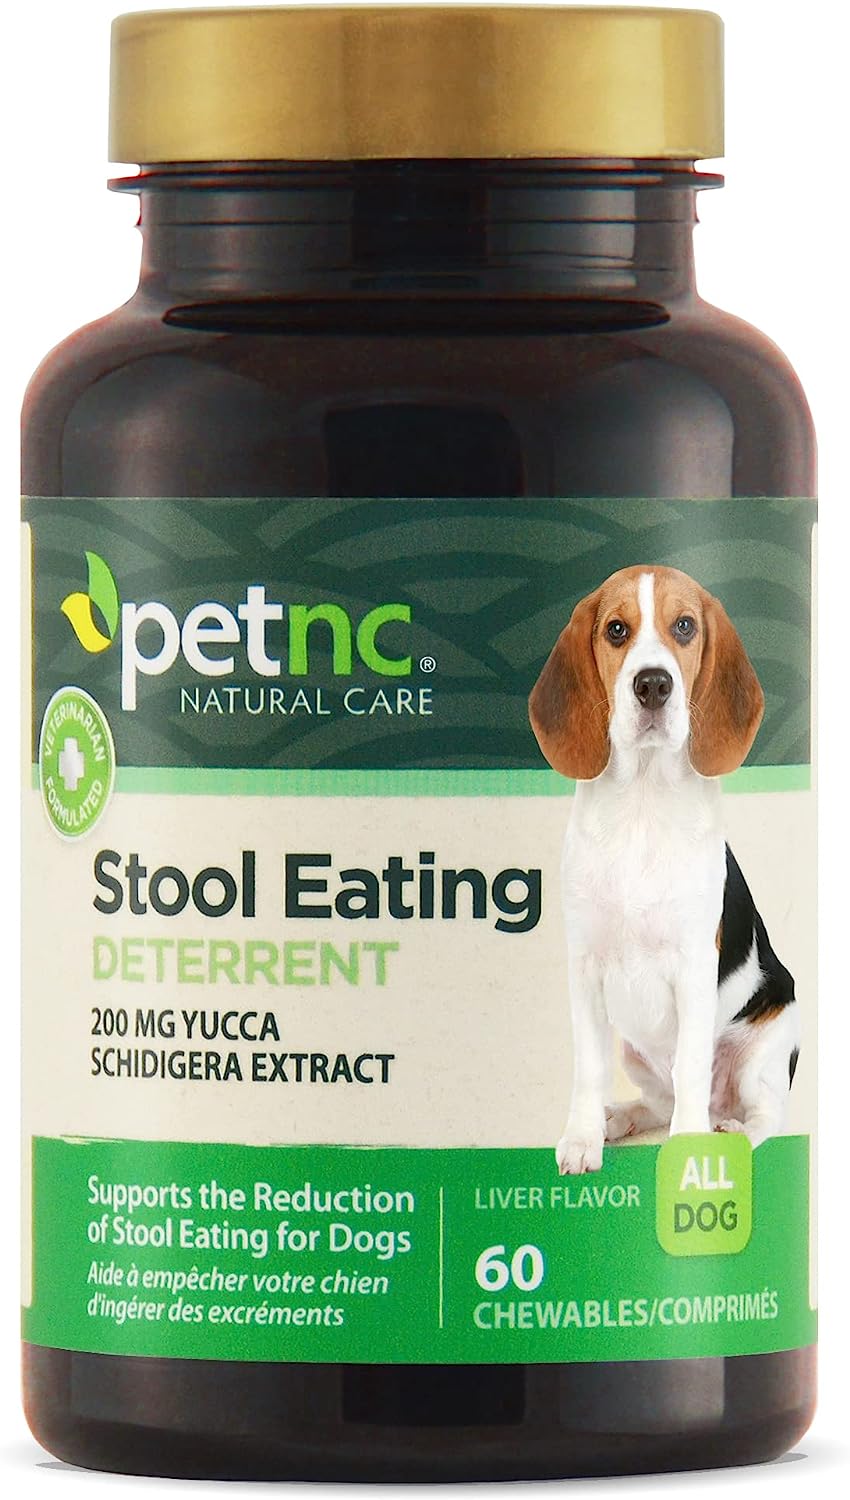 10. PetNC Natural Care Stool Eating Deterrent Chewables for Dogs